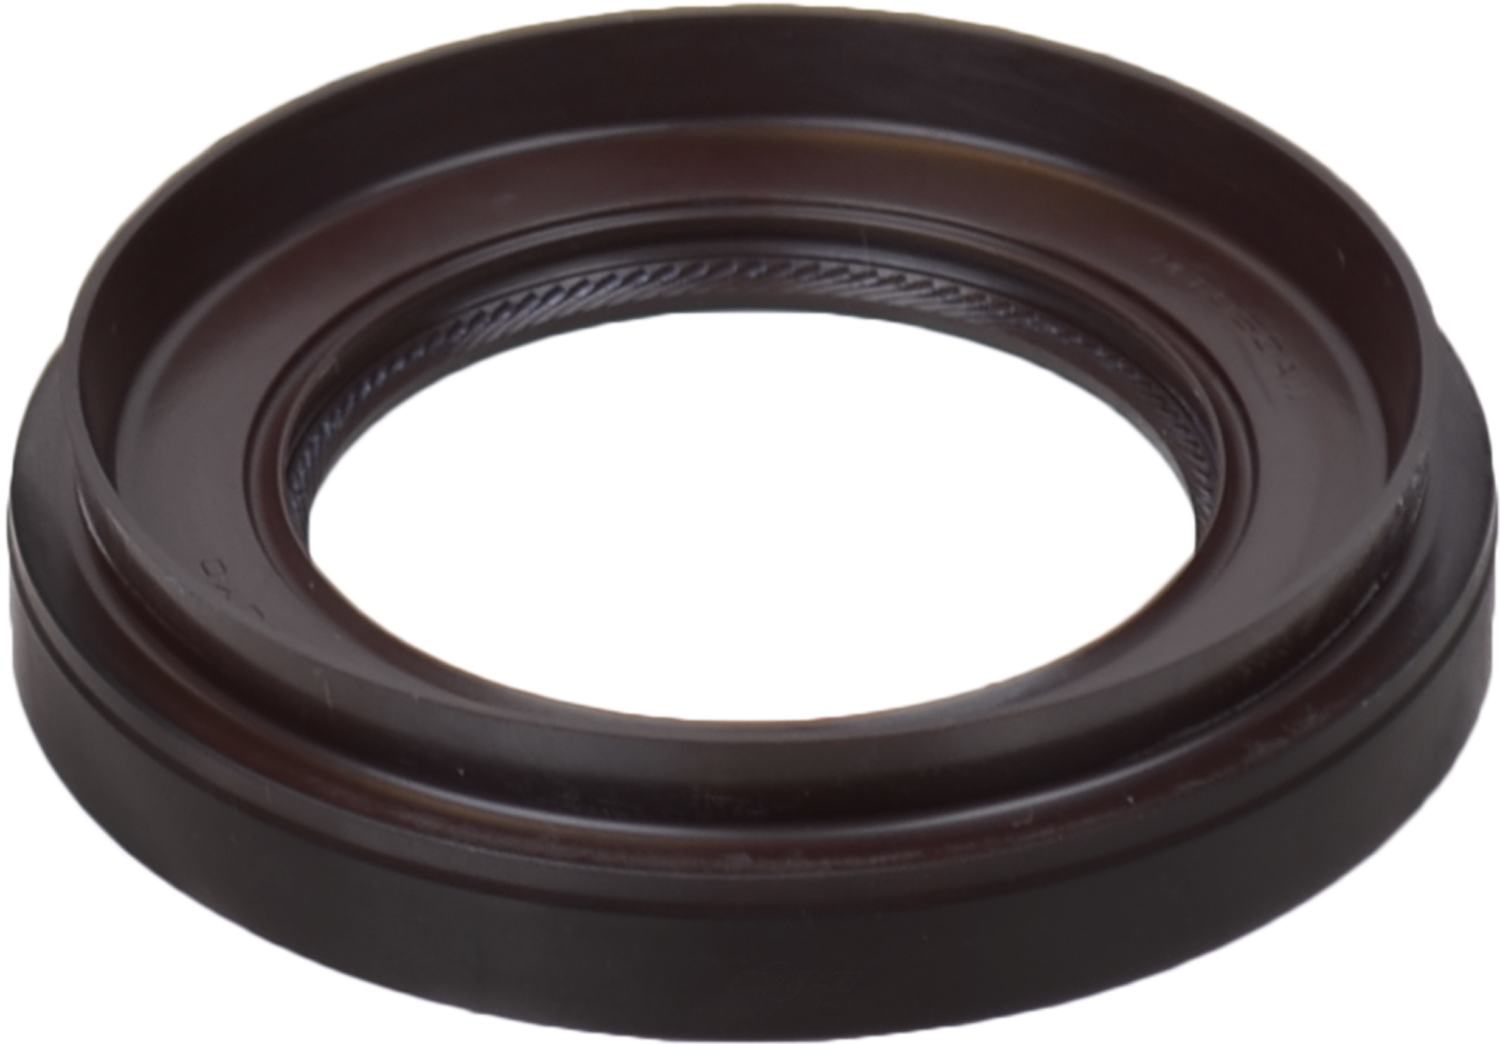 SKF (CHICAGO RAWHIDE) - Auto Trans Output Shaft Seal (Left) - SKF 20027